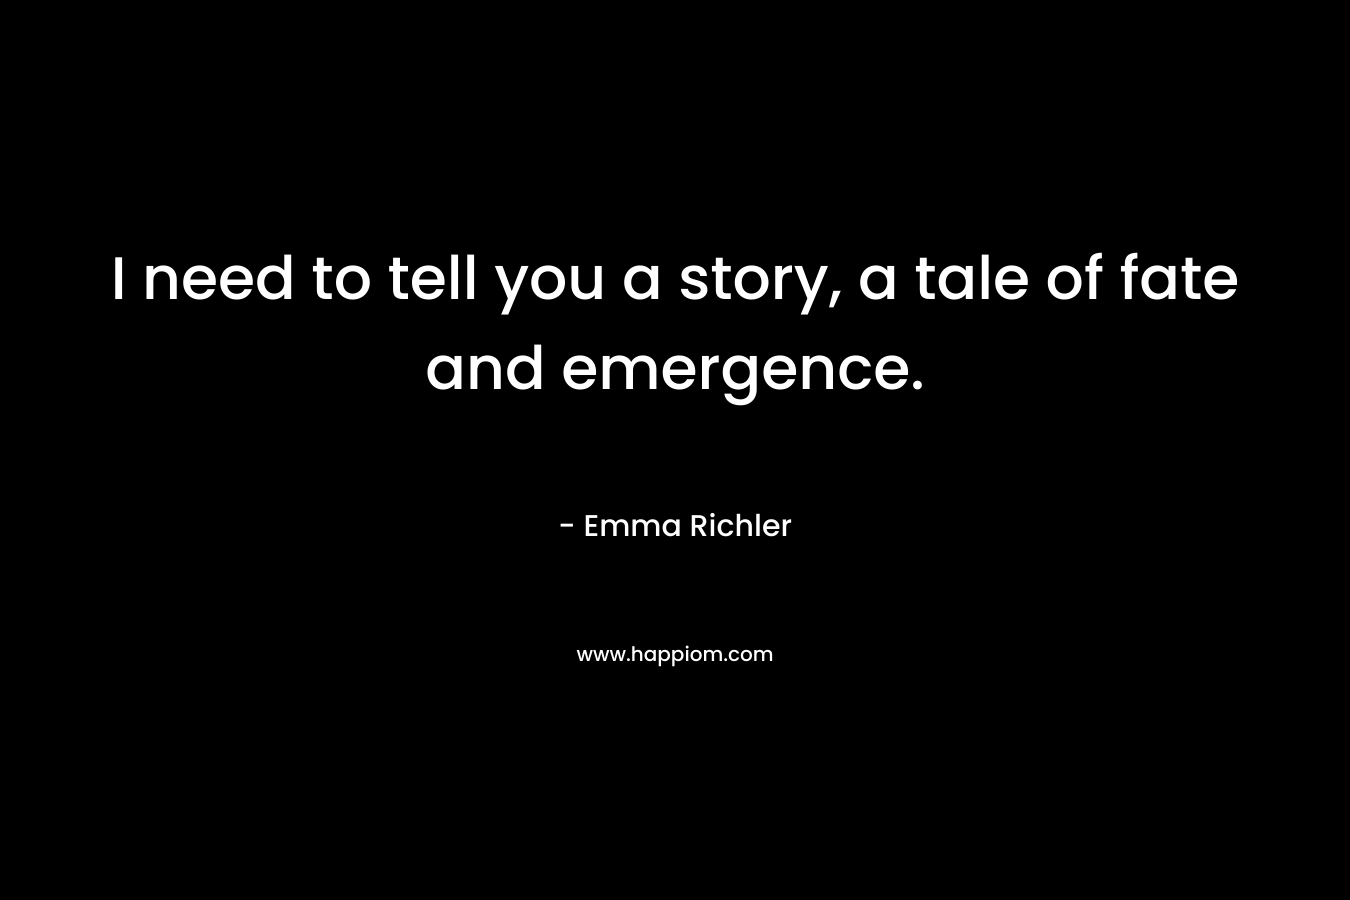 I need to tell you a story, a tale of fate and emergence. – Emma Richler